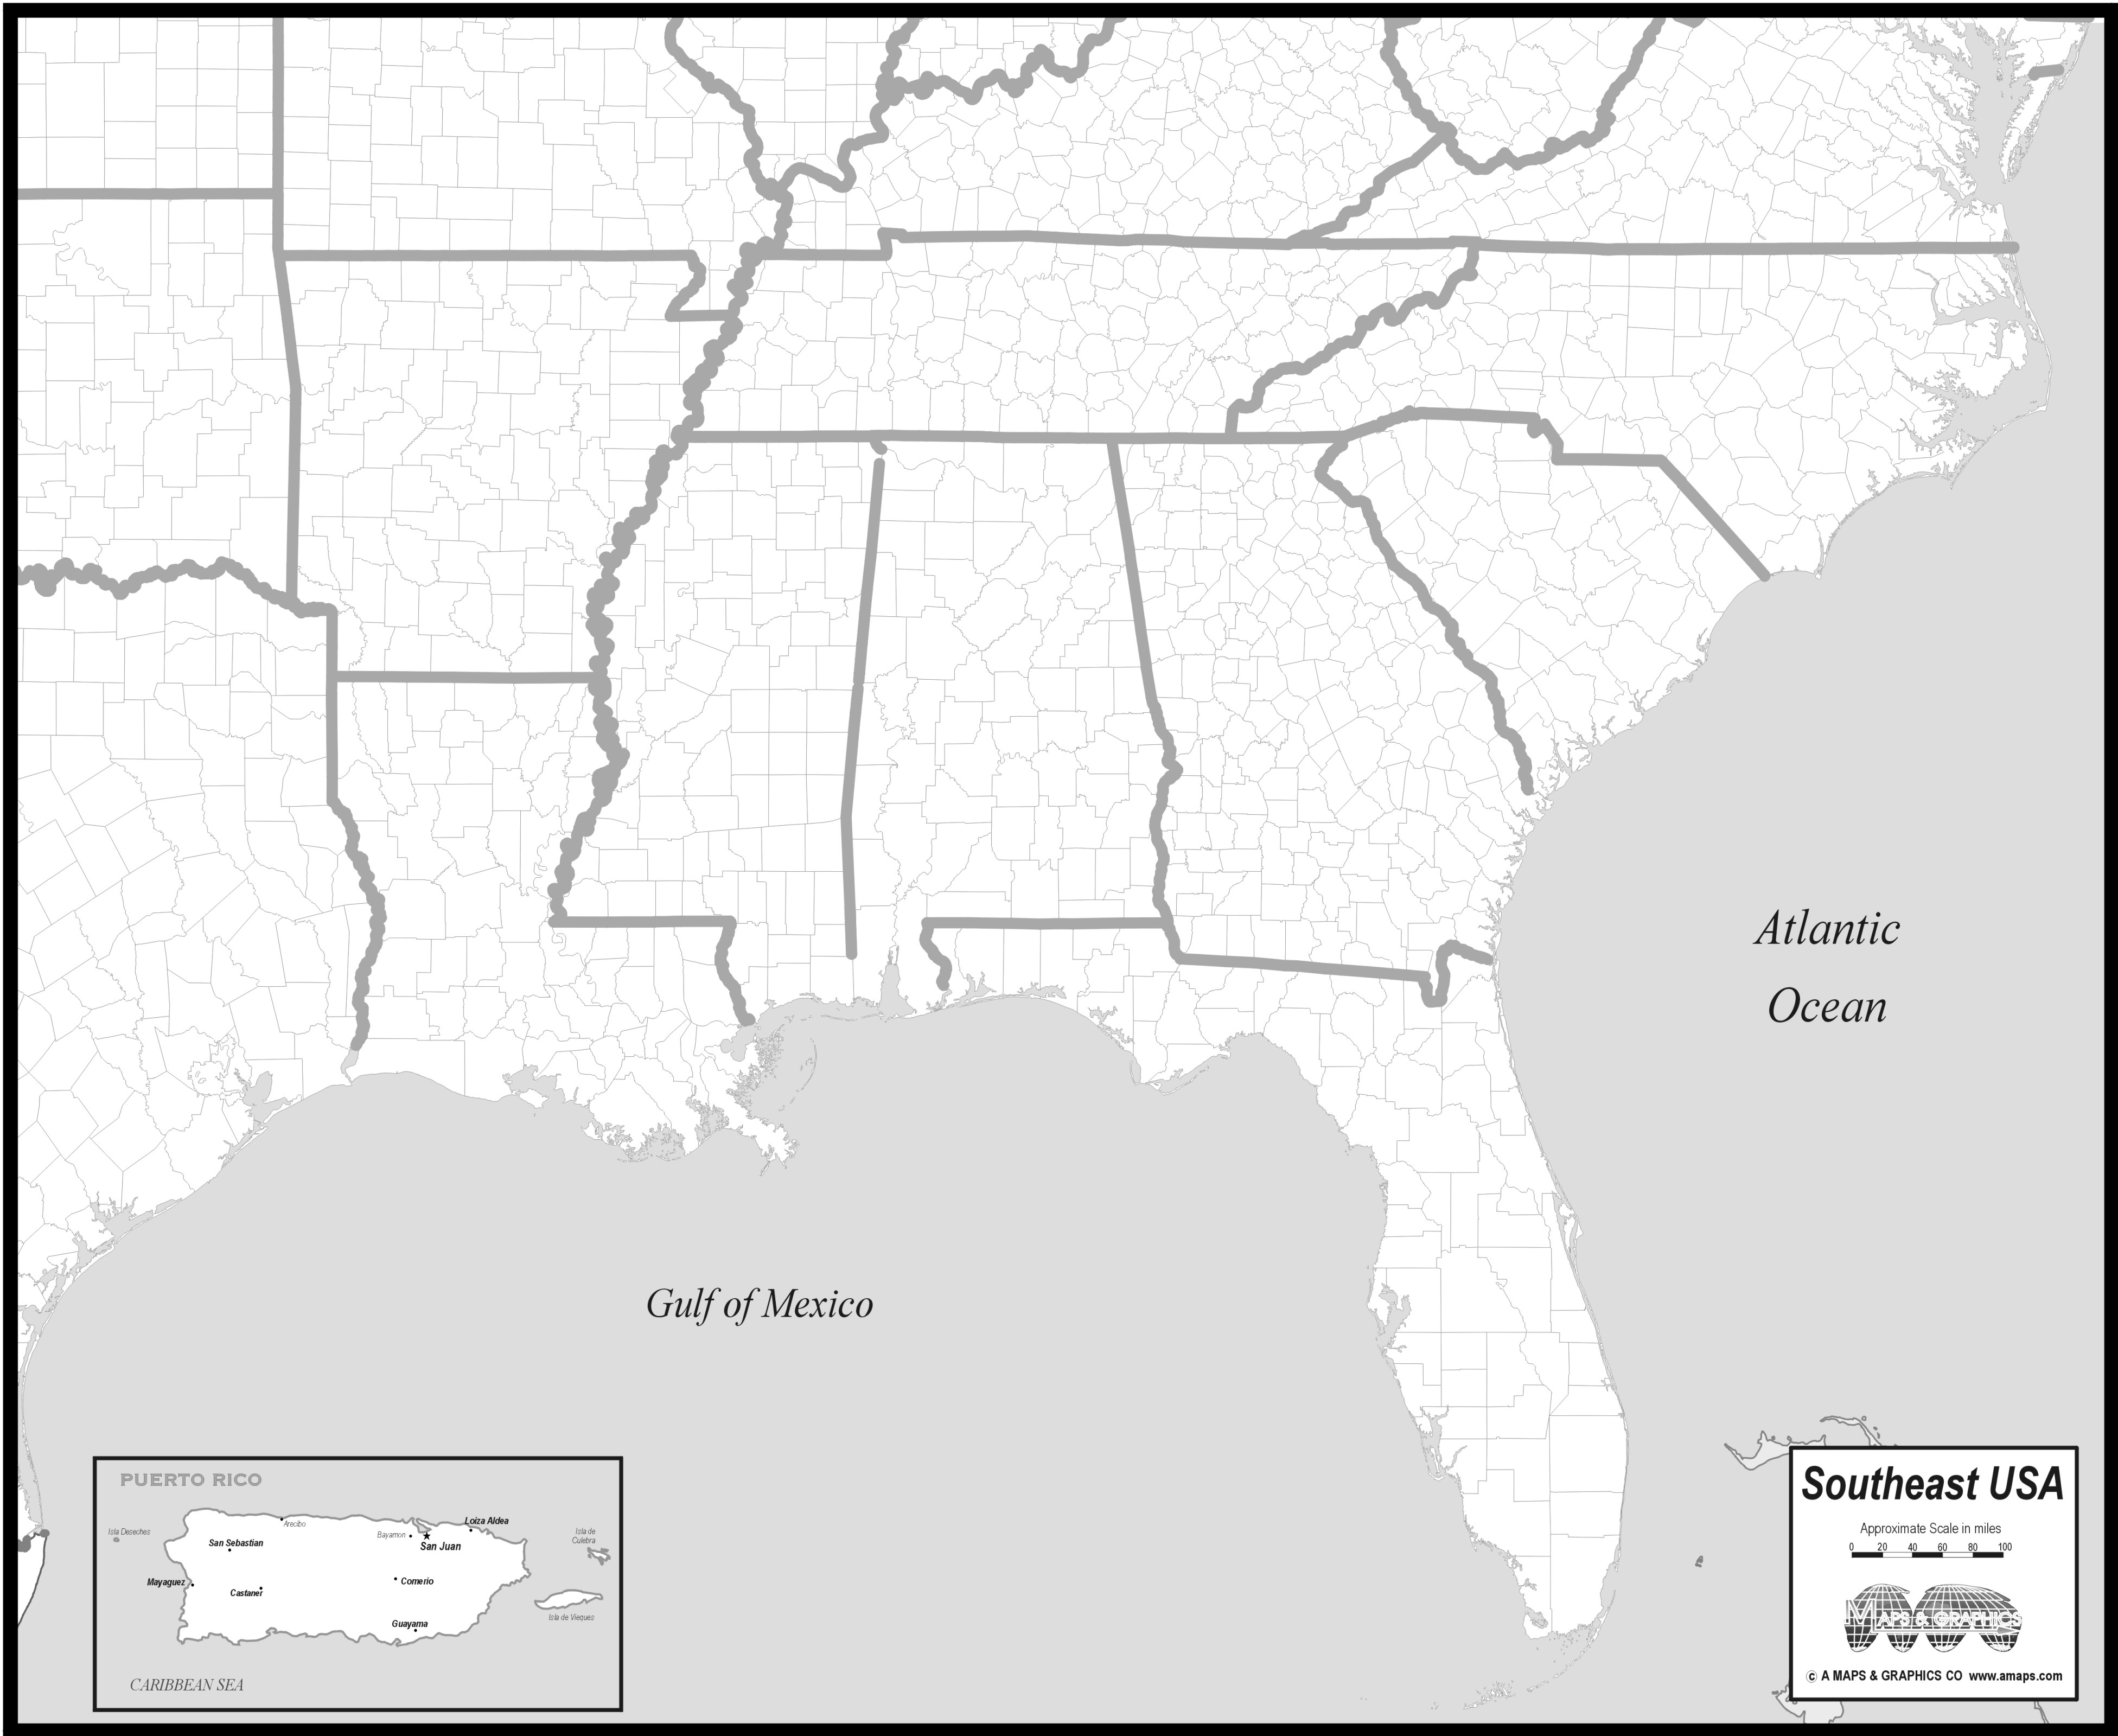 FREE MAP OF SOUTHEAST STATES